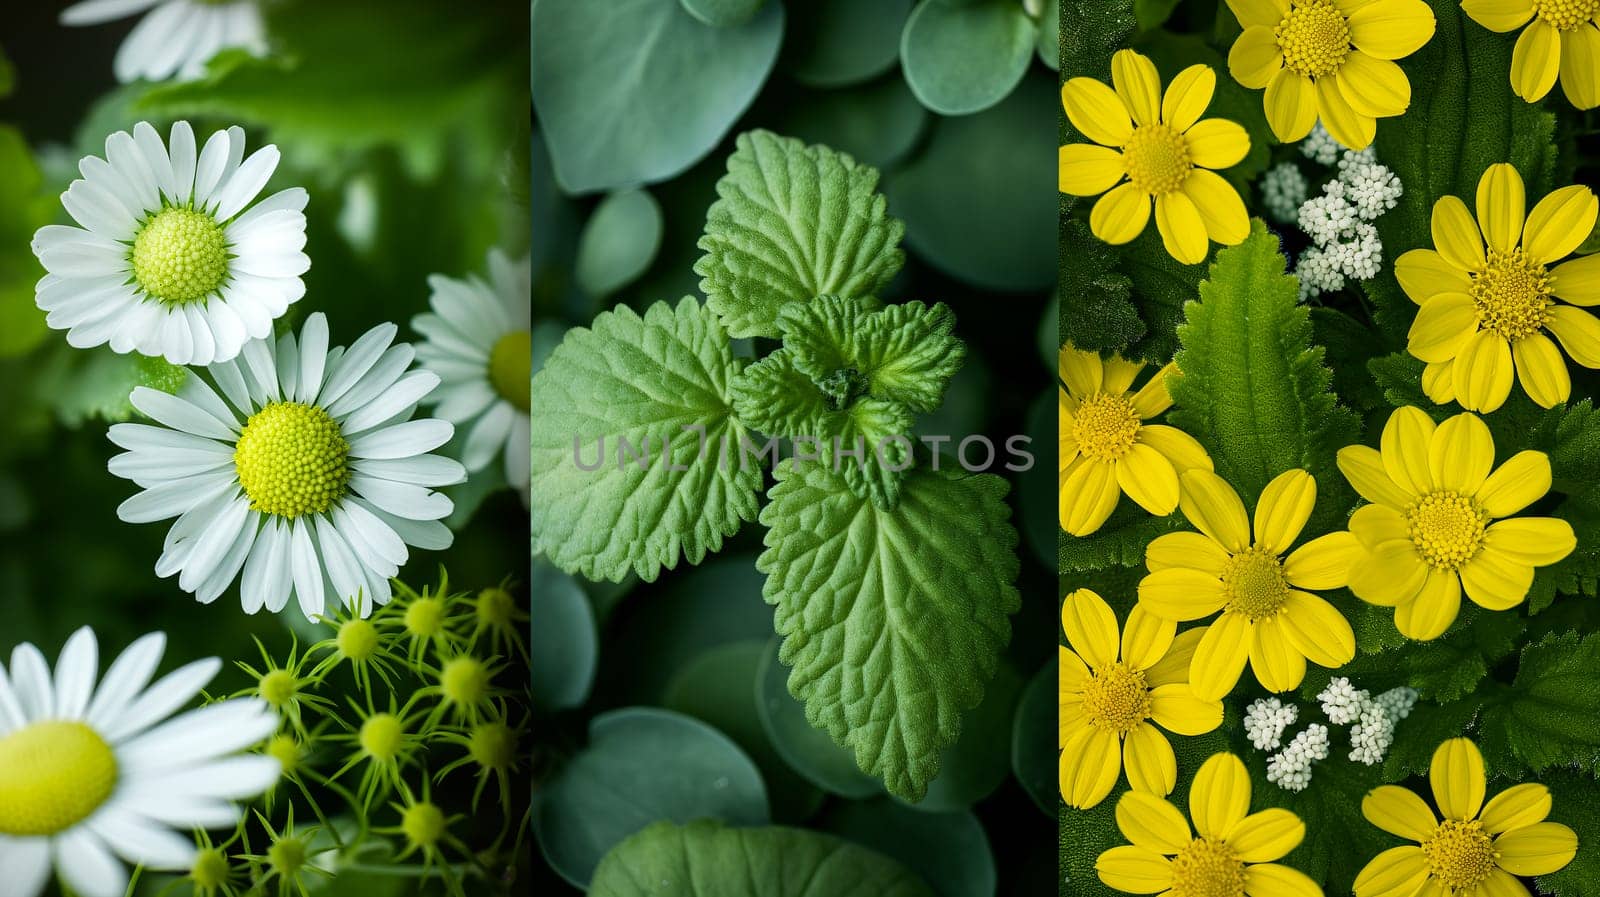 This image captures the vibrant beauty of spring with a collage of white daisies, fresh green leaves, and bright yellow flowers in bloom - Generative AI